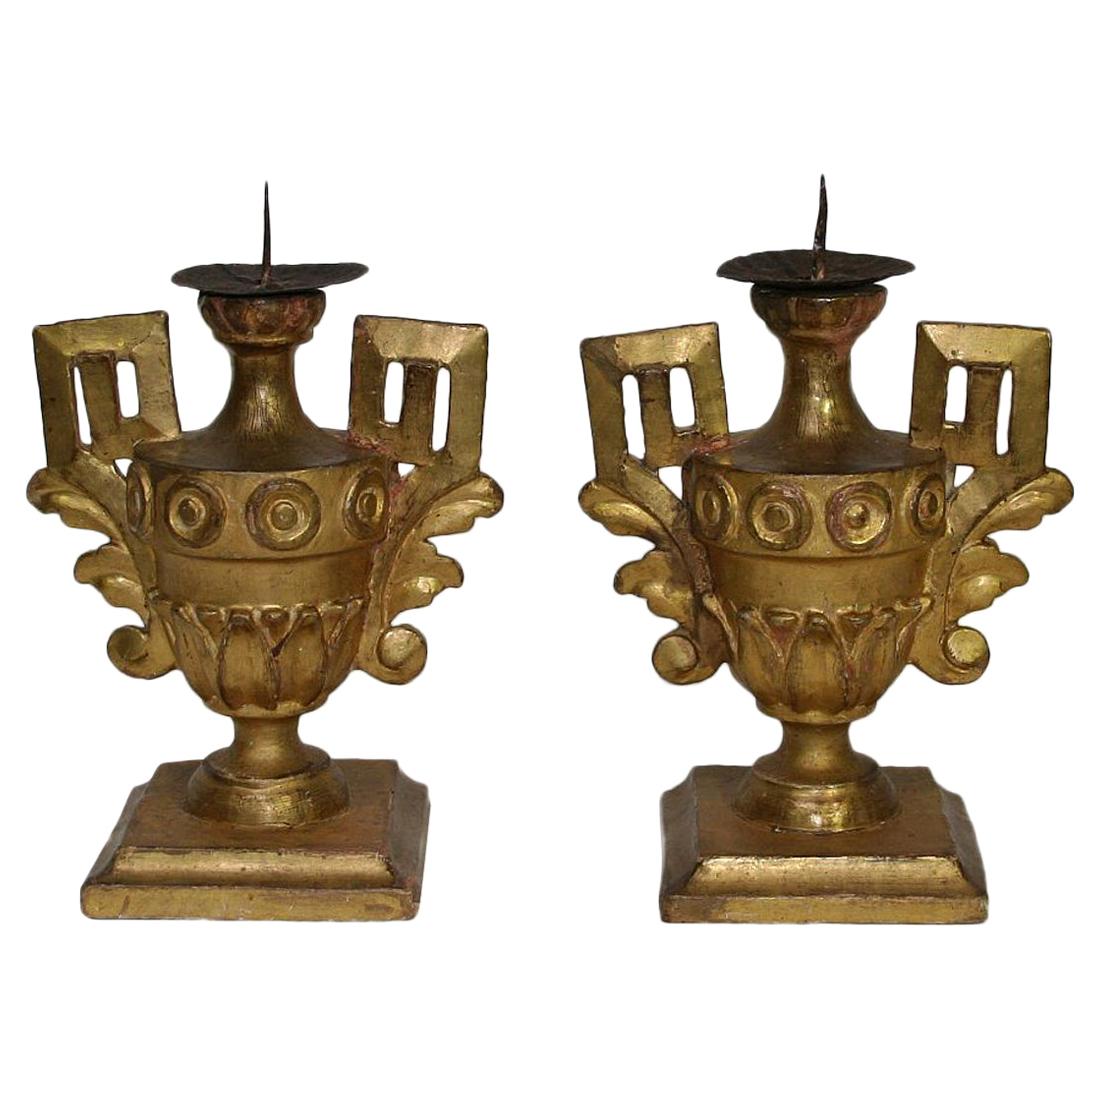 Couple of Late 18th Century Italian Giltwood Neoclassical Candlesticks